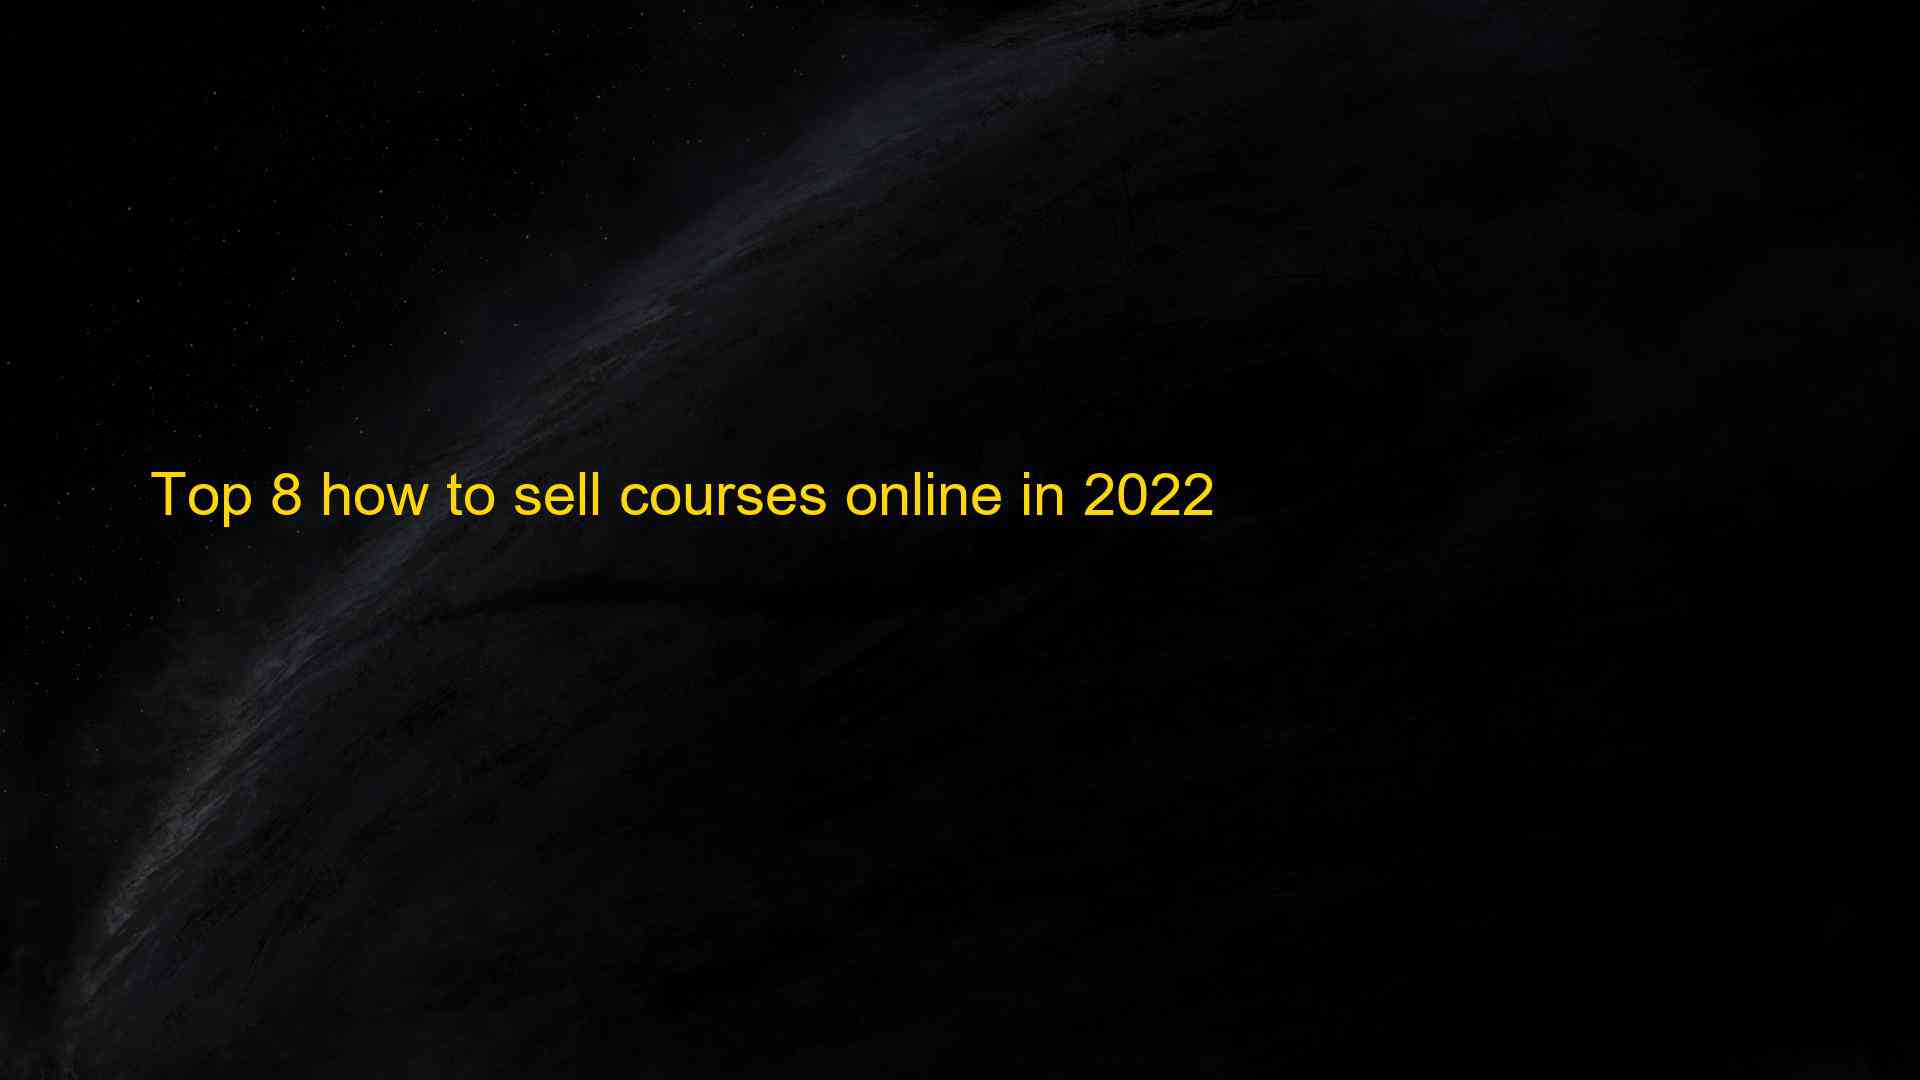 Top 8 how to sell courses online in 2022 1660979335